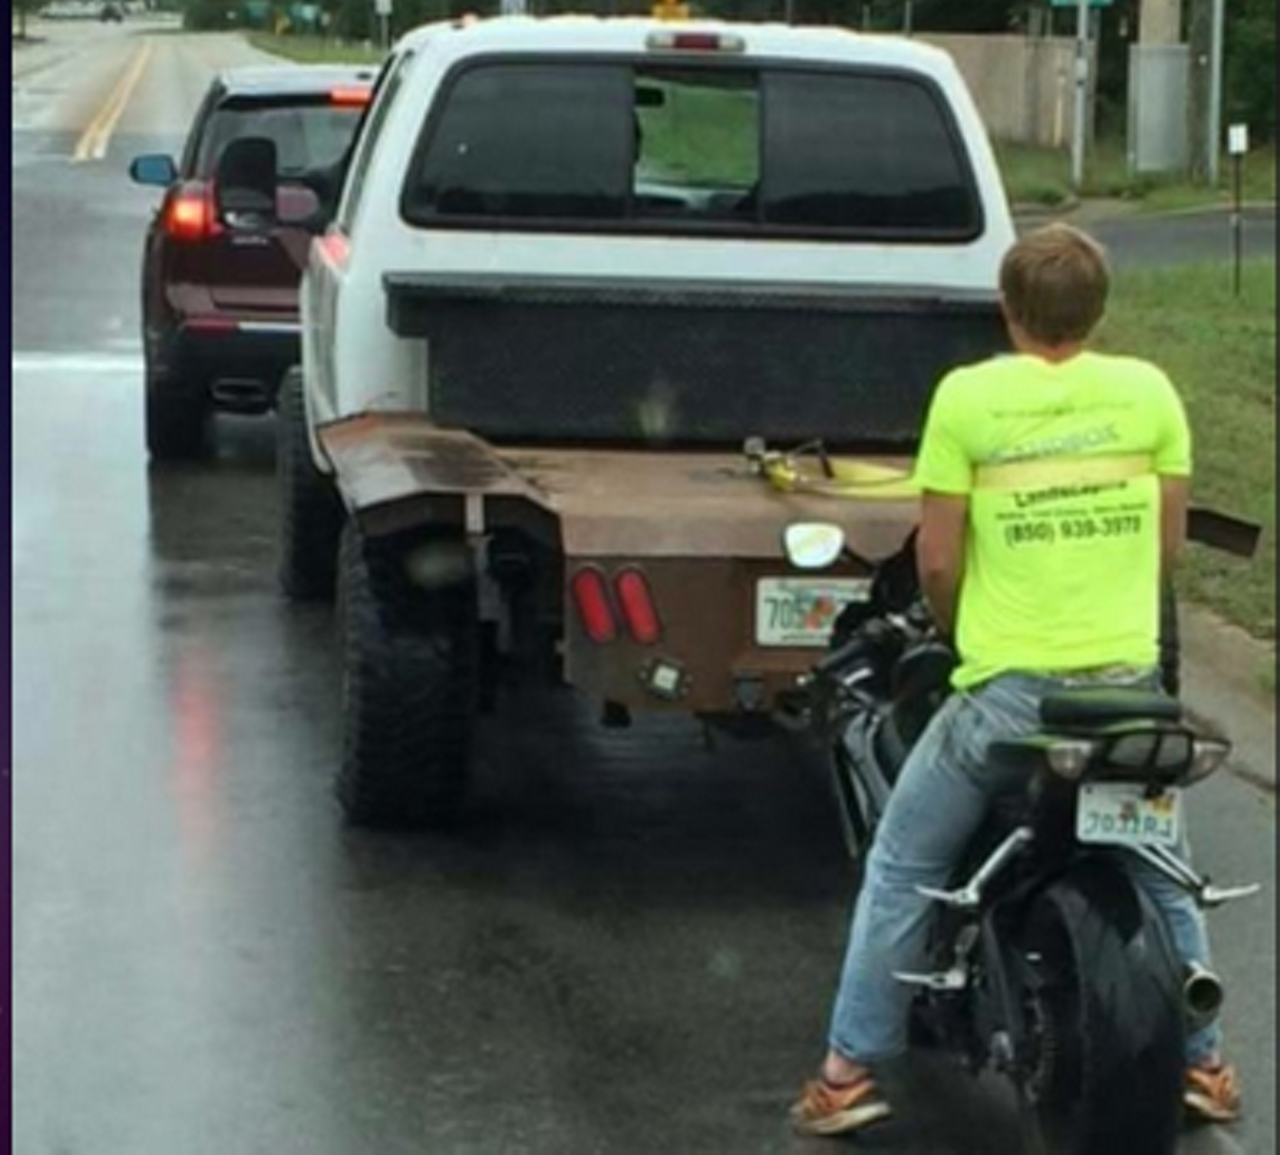 You could choose to have your motorcycle towed with a chain.
Photo via Imgur